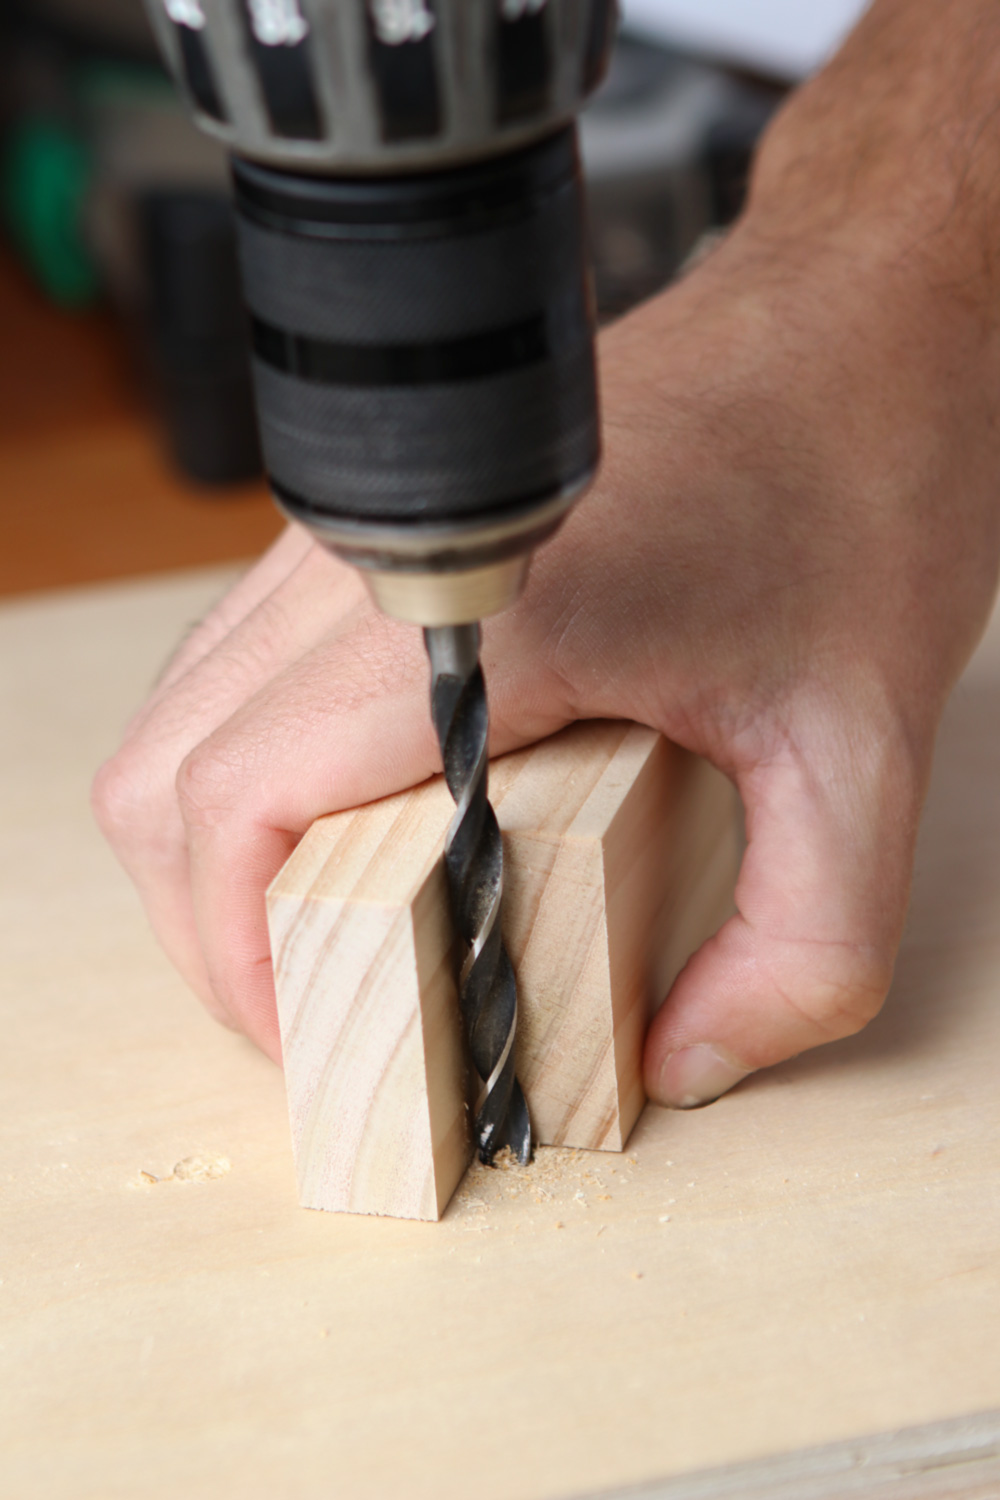 How To Drill Straight And Square Holes Without A Drill Press Manmade Diy